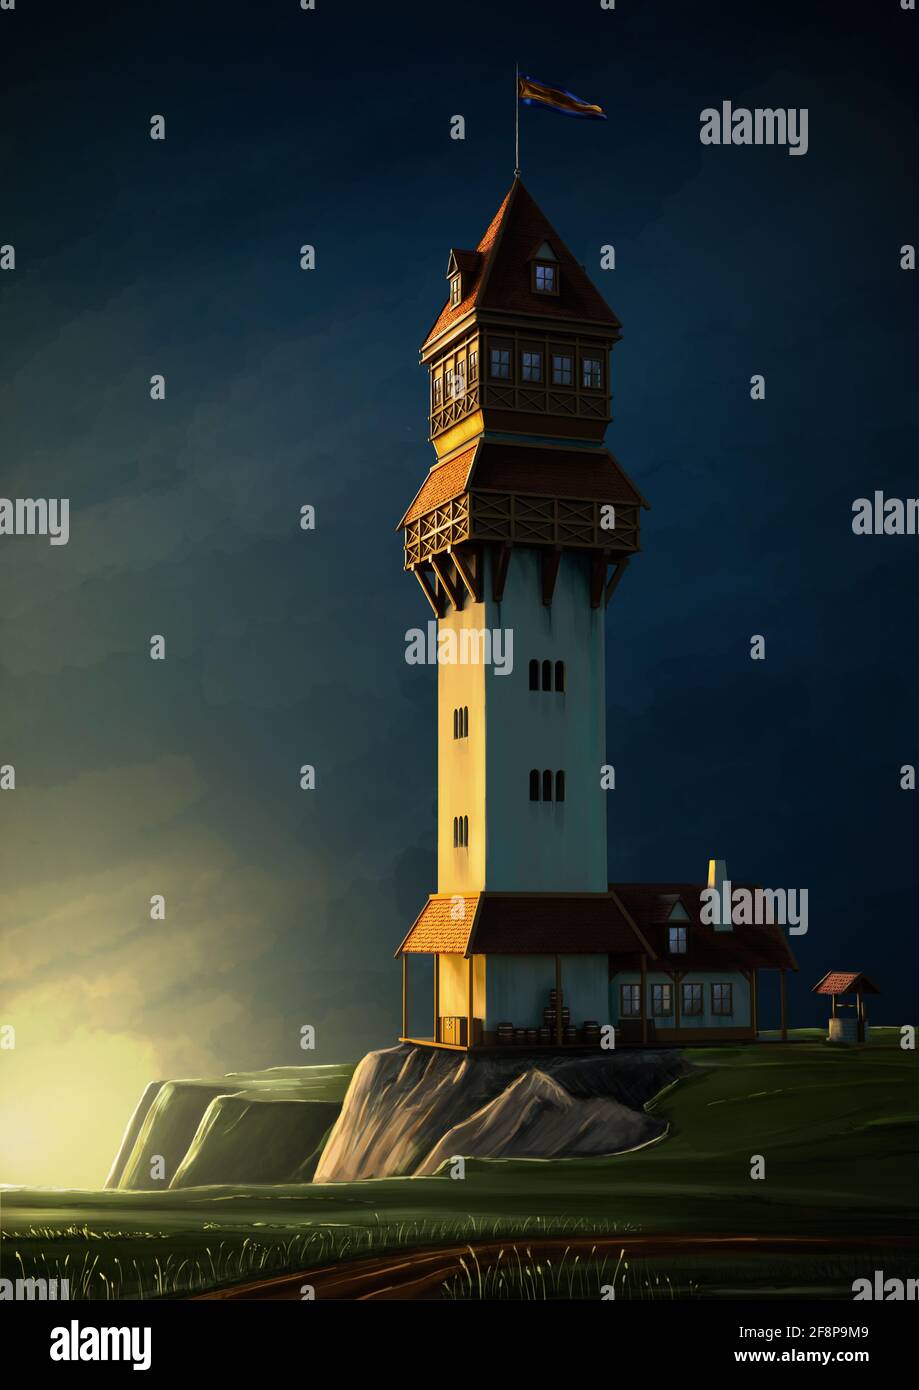 Medieval watchtower on the high cliff. Fantasy scene by the sunset. Digital painting illustration. Stock Photo